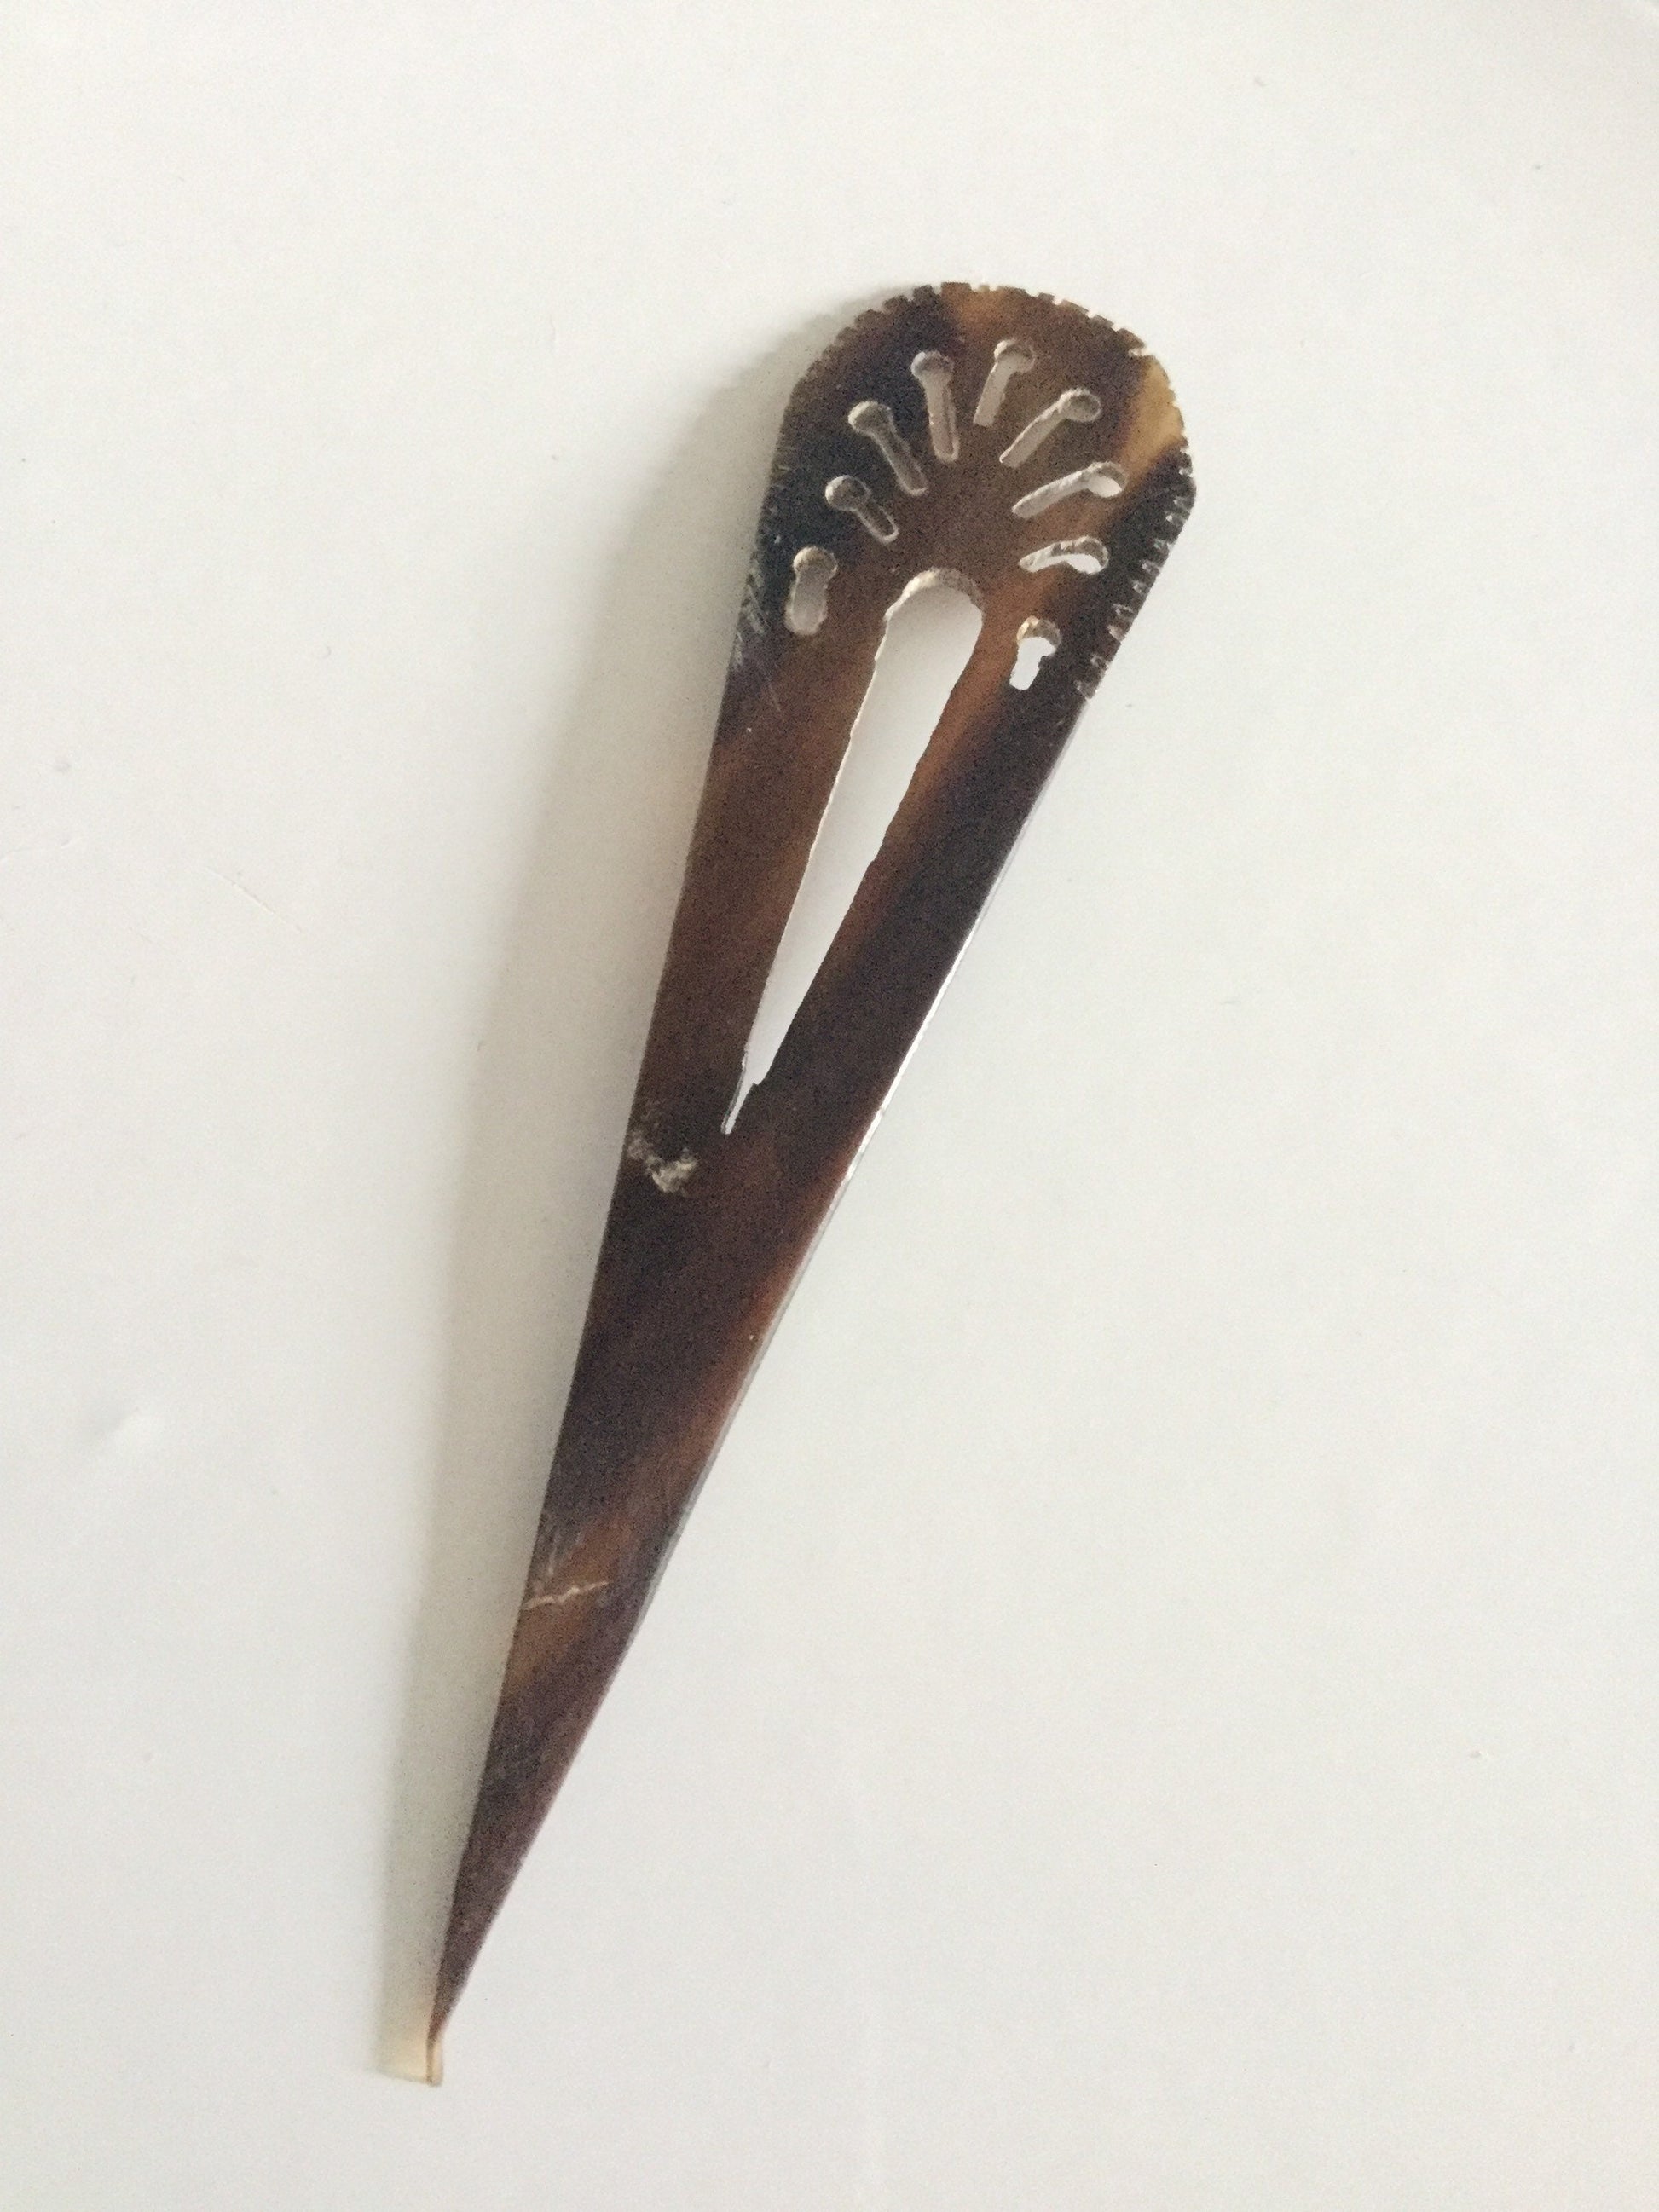 Antique Vintage Edwardian French Bone or Horn or faux tortoiseshell Hair comb grip 1 prong